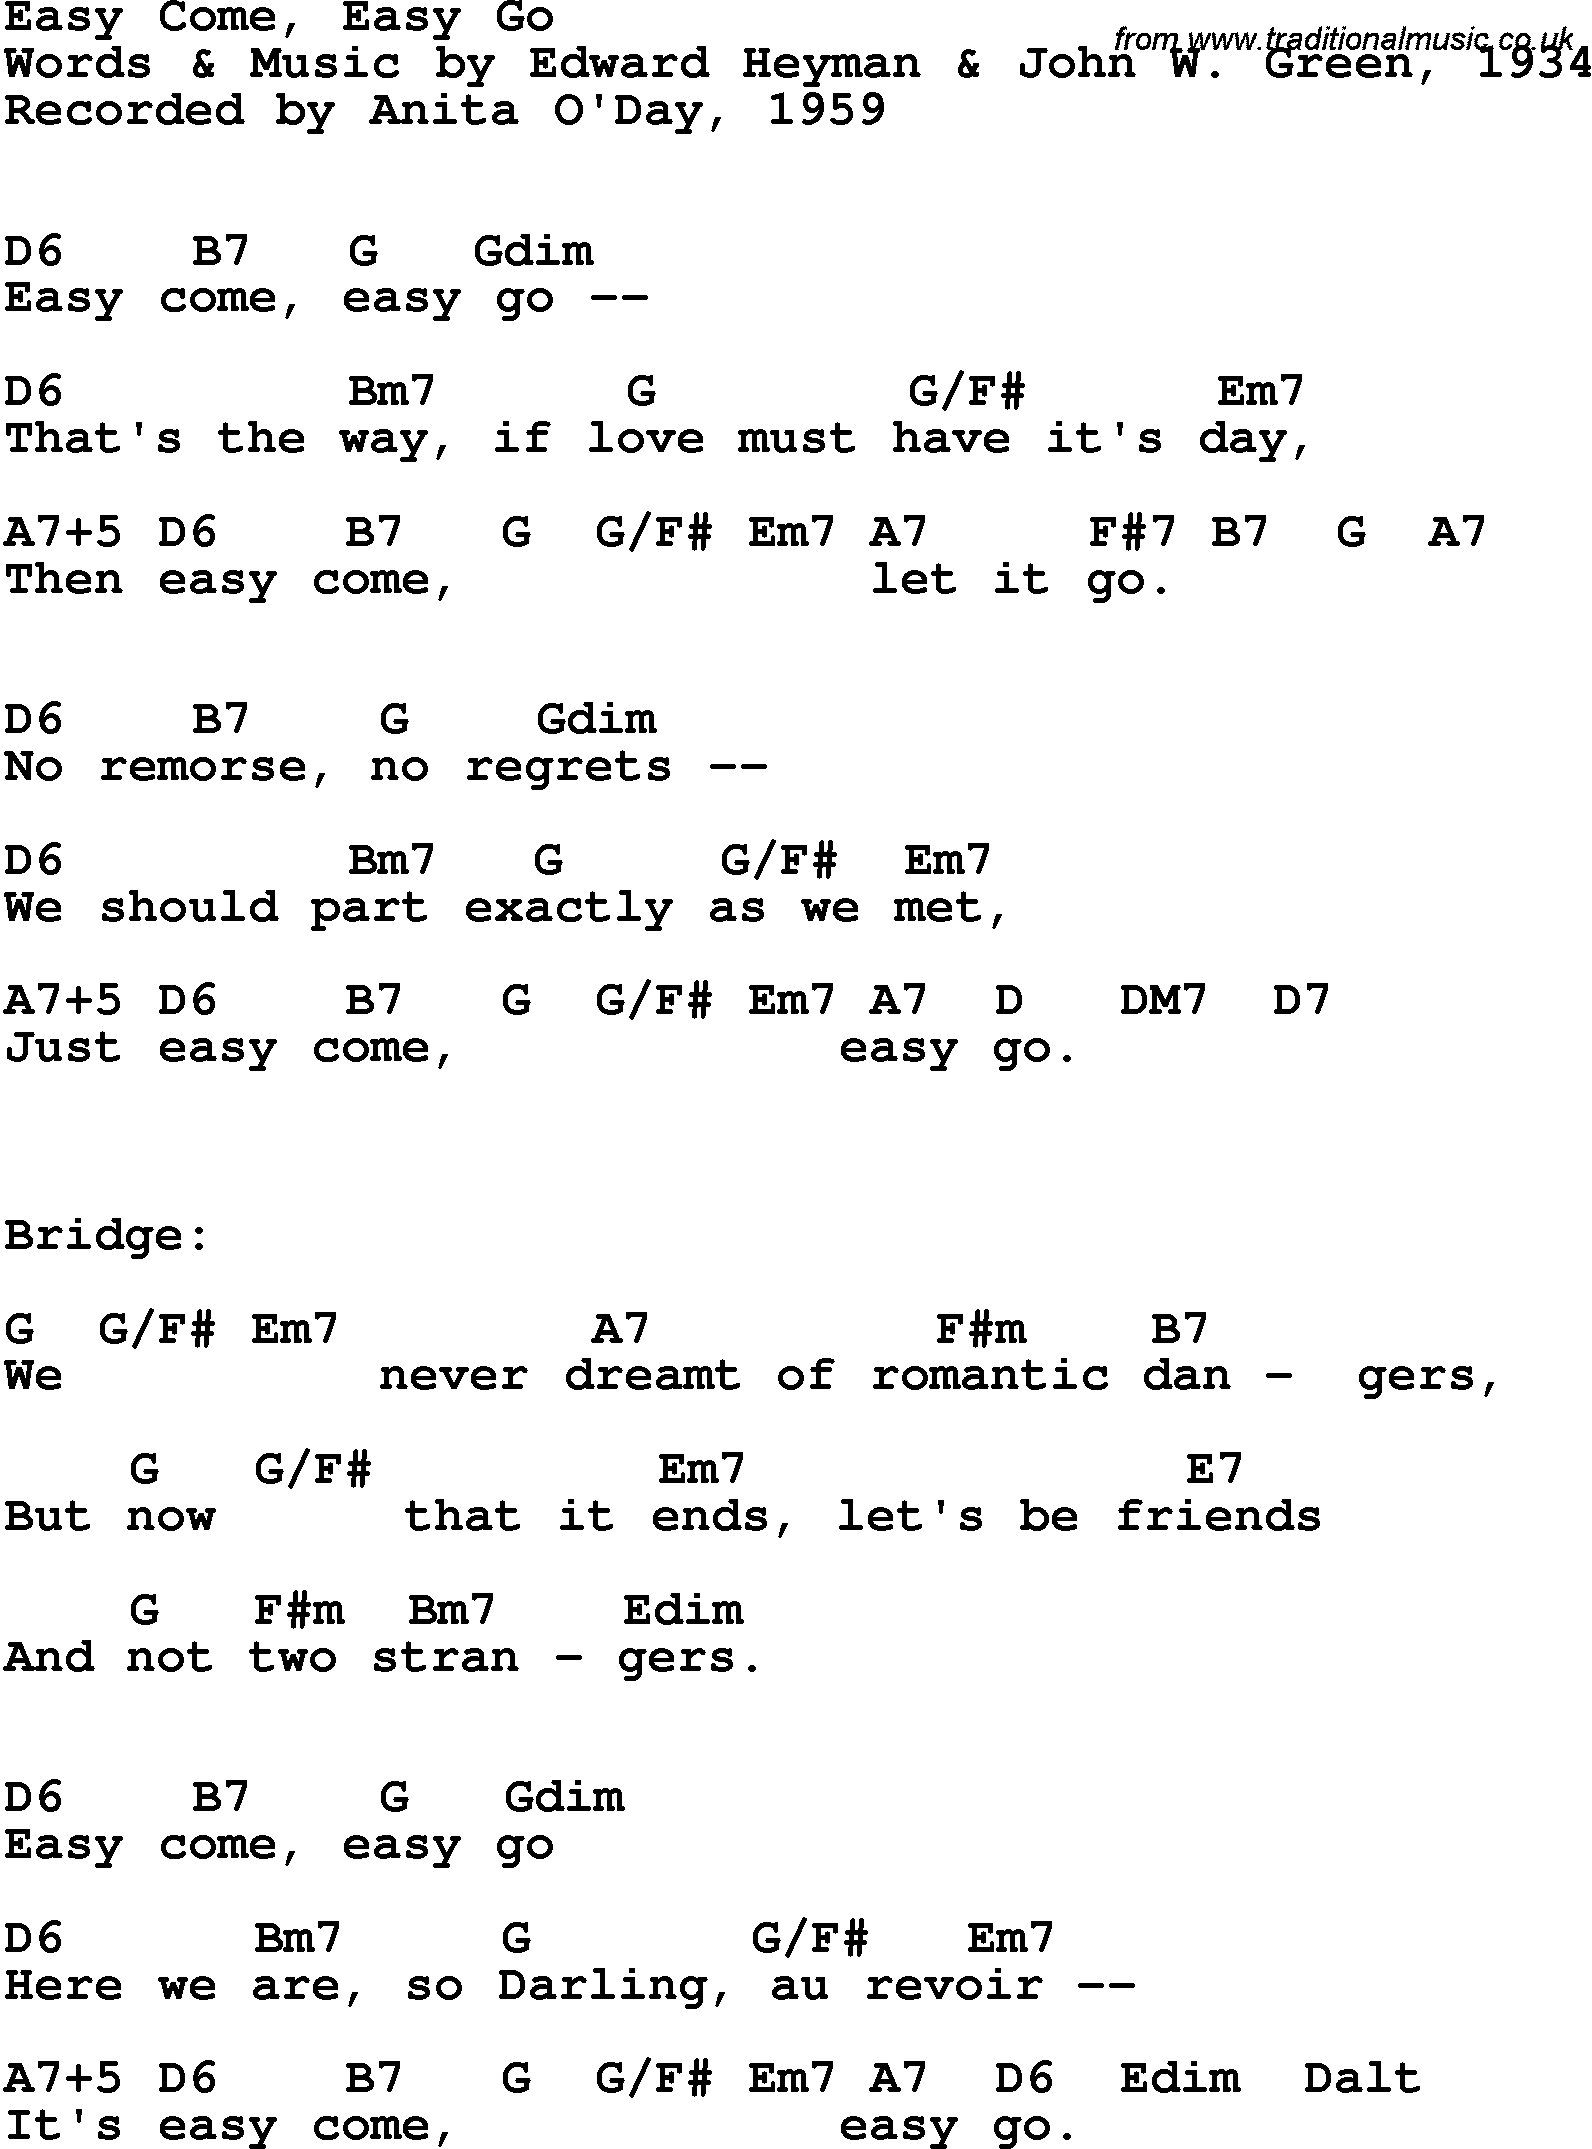 Song Lyrics with guitar chords for Easy Come, Easy Go - Anita O'day, 1959